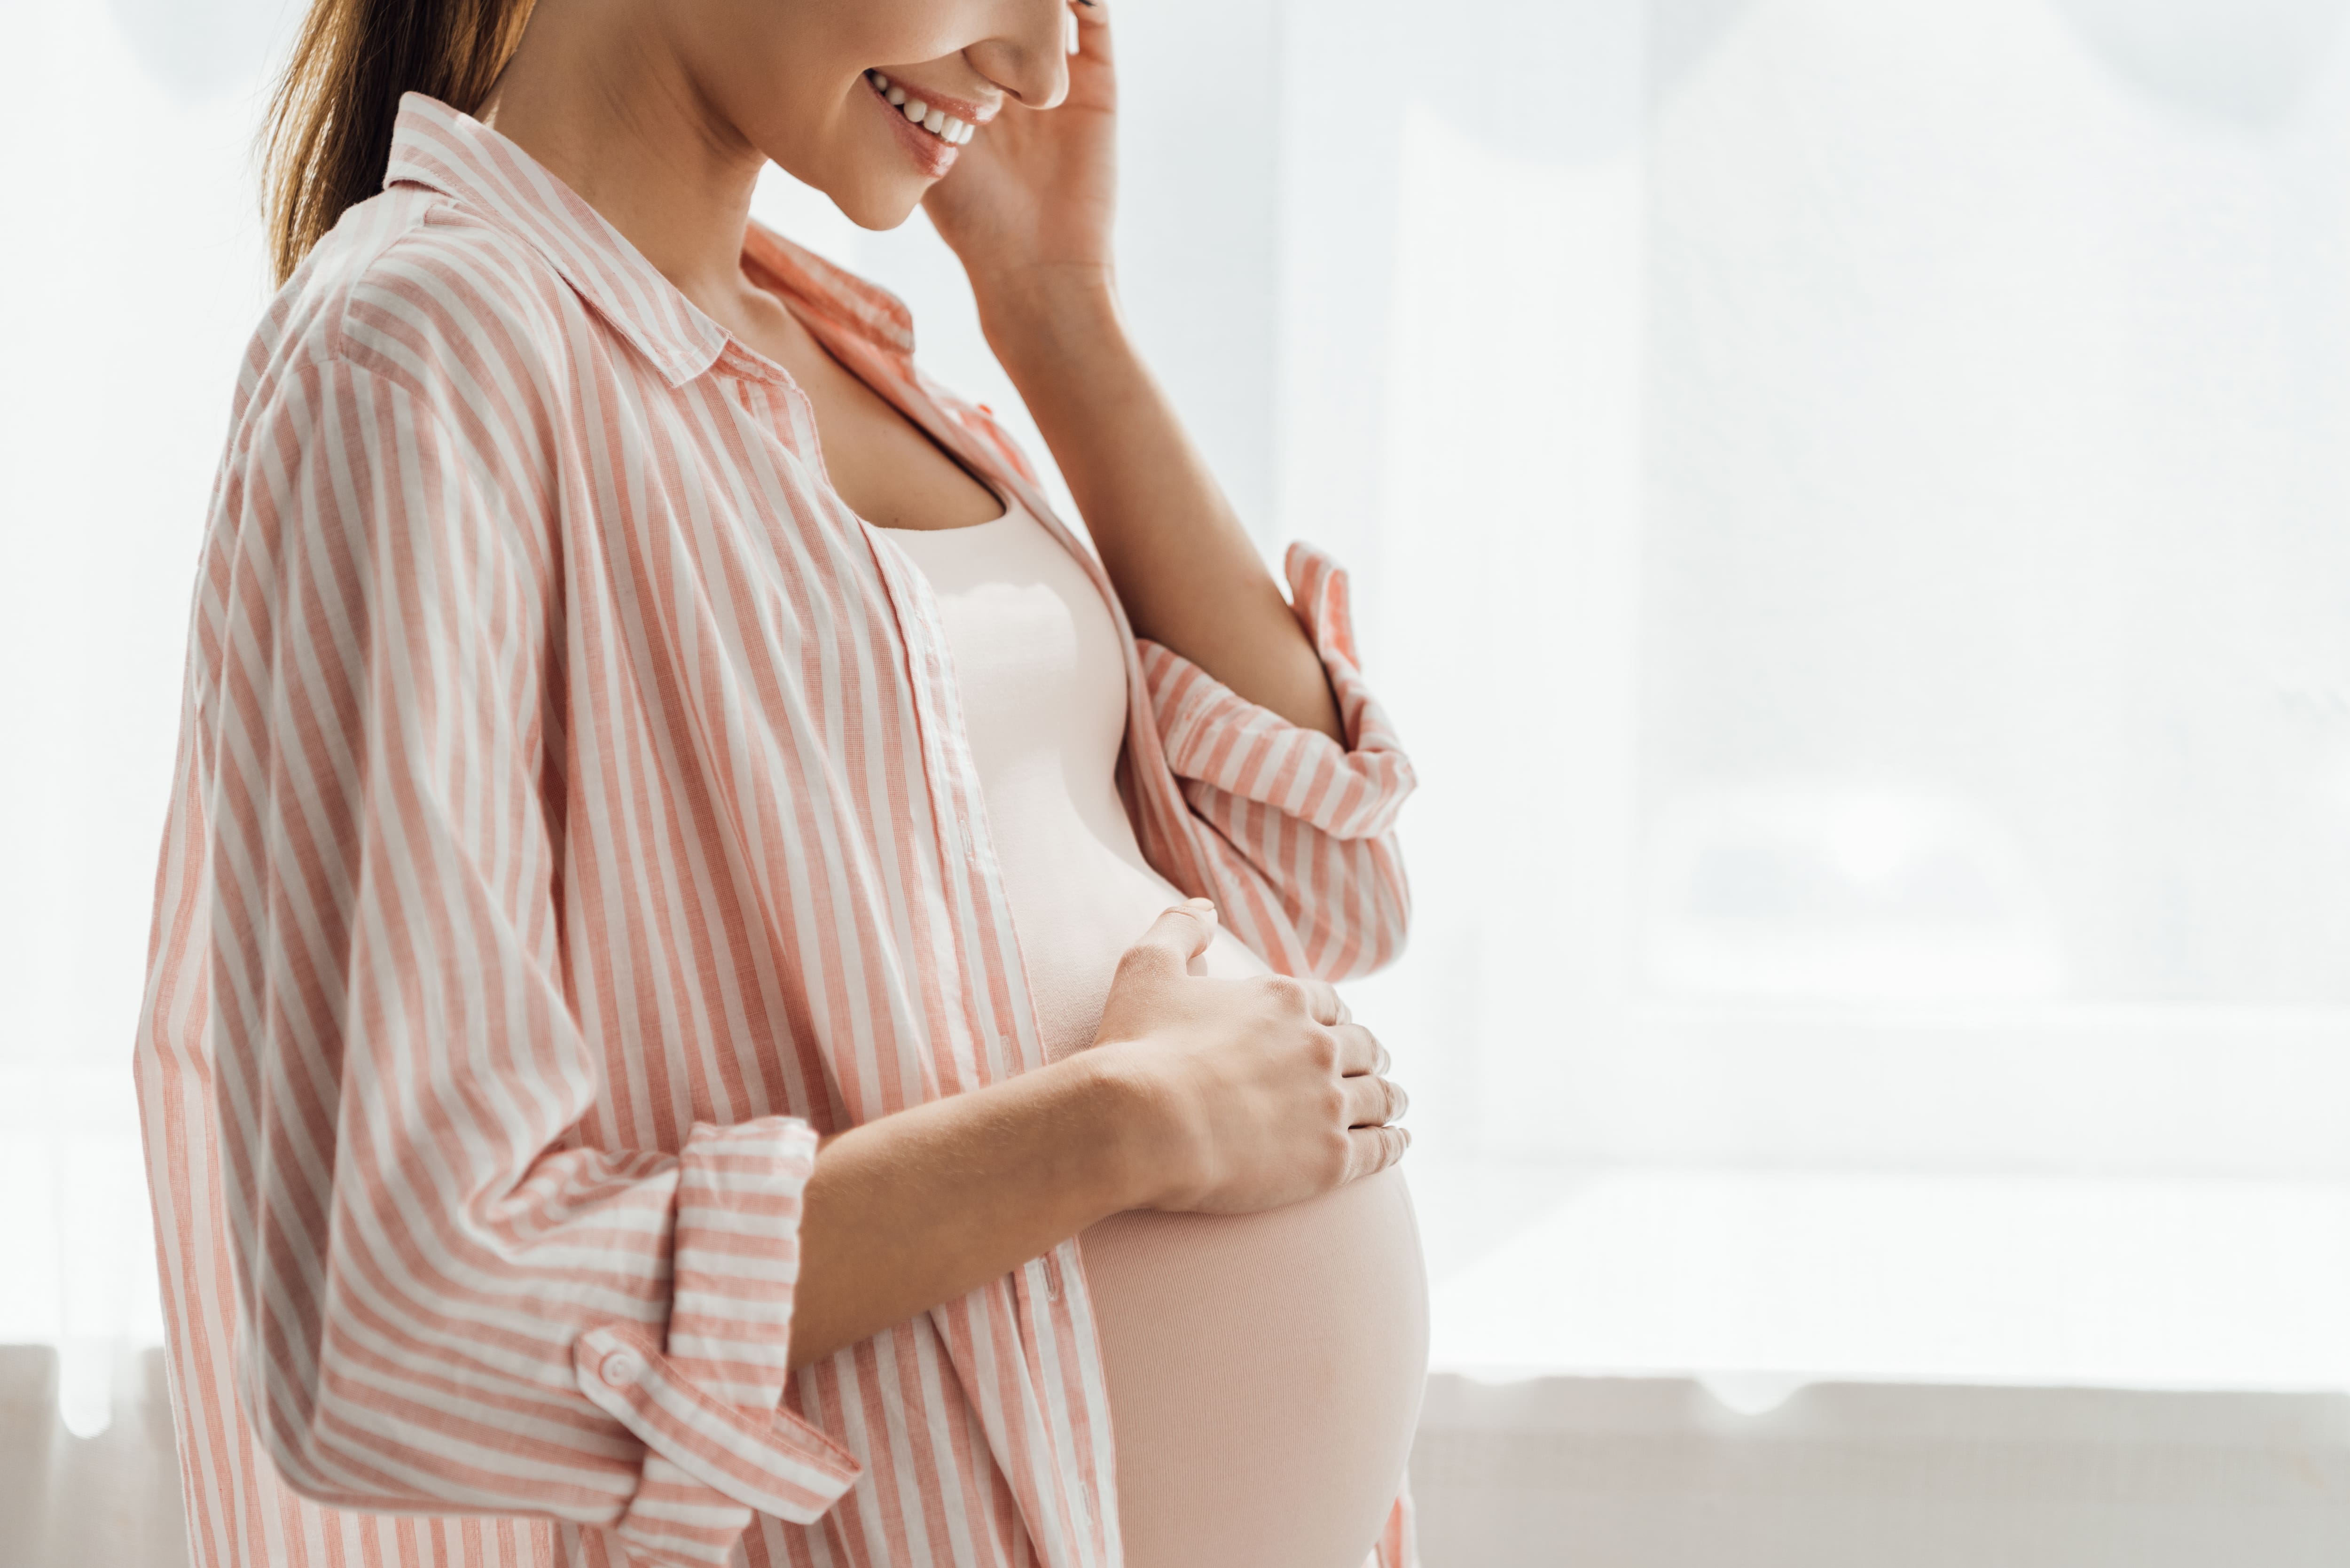 relief for dry mouth during pregnancy - colgate philippines